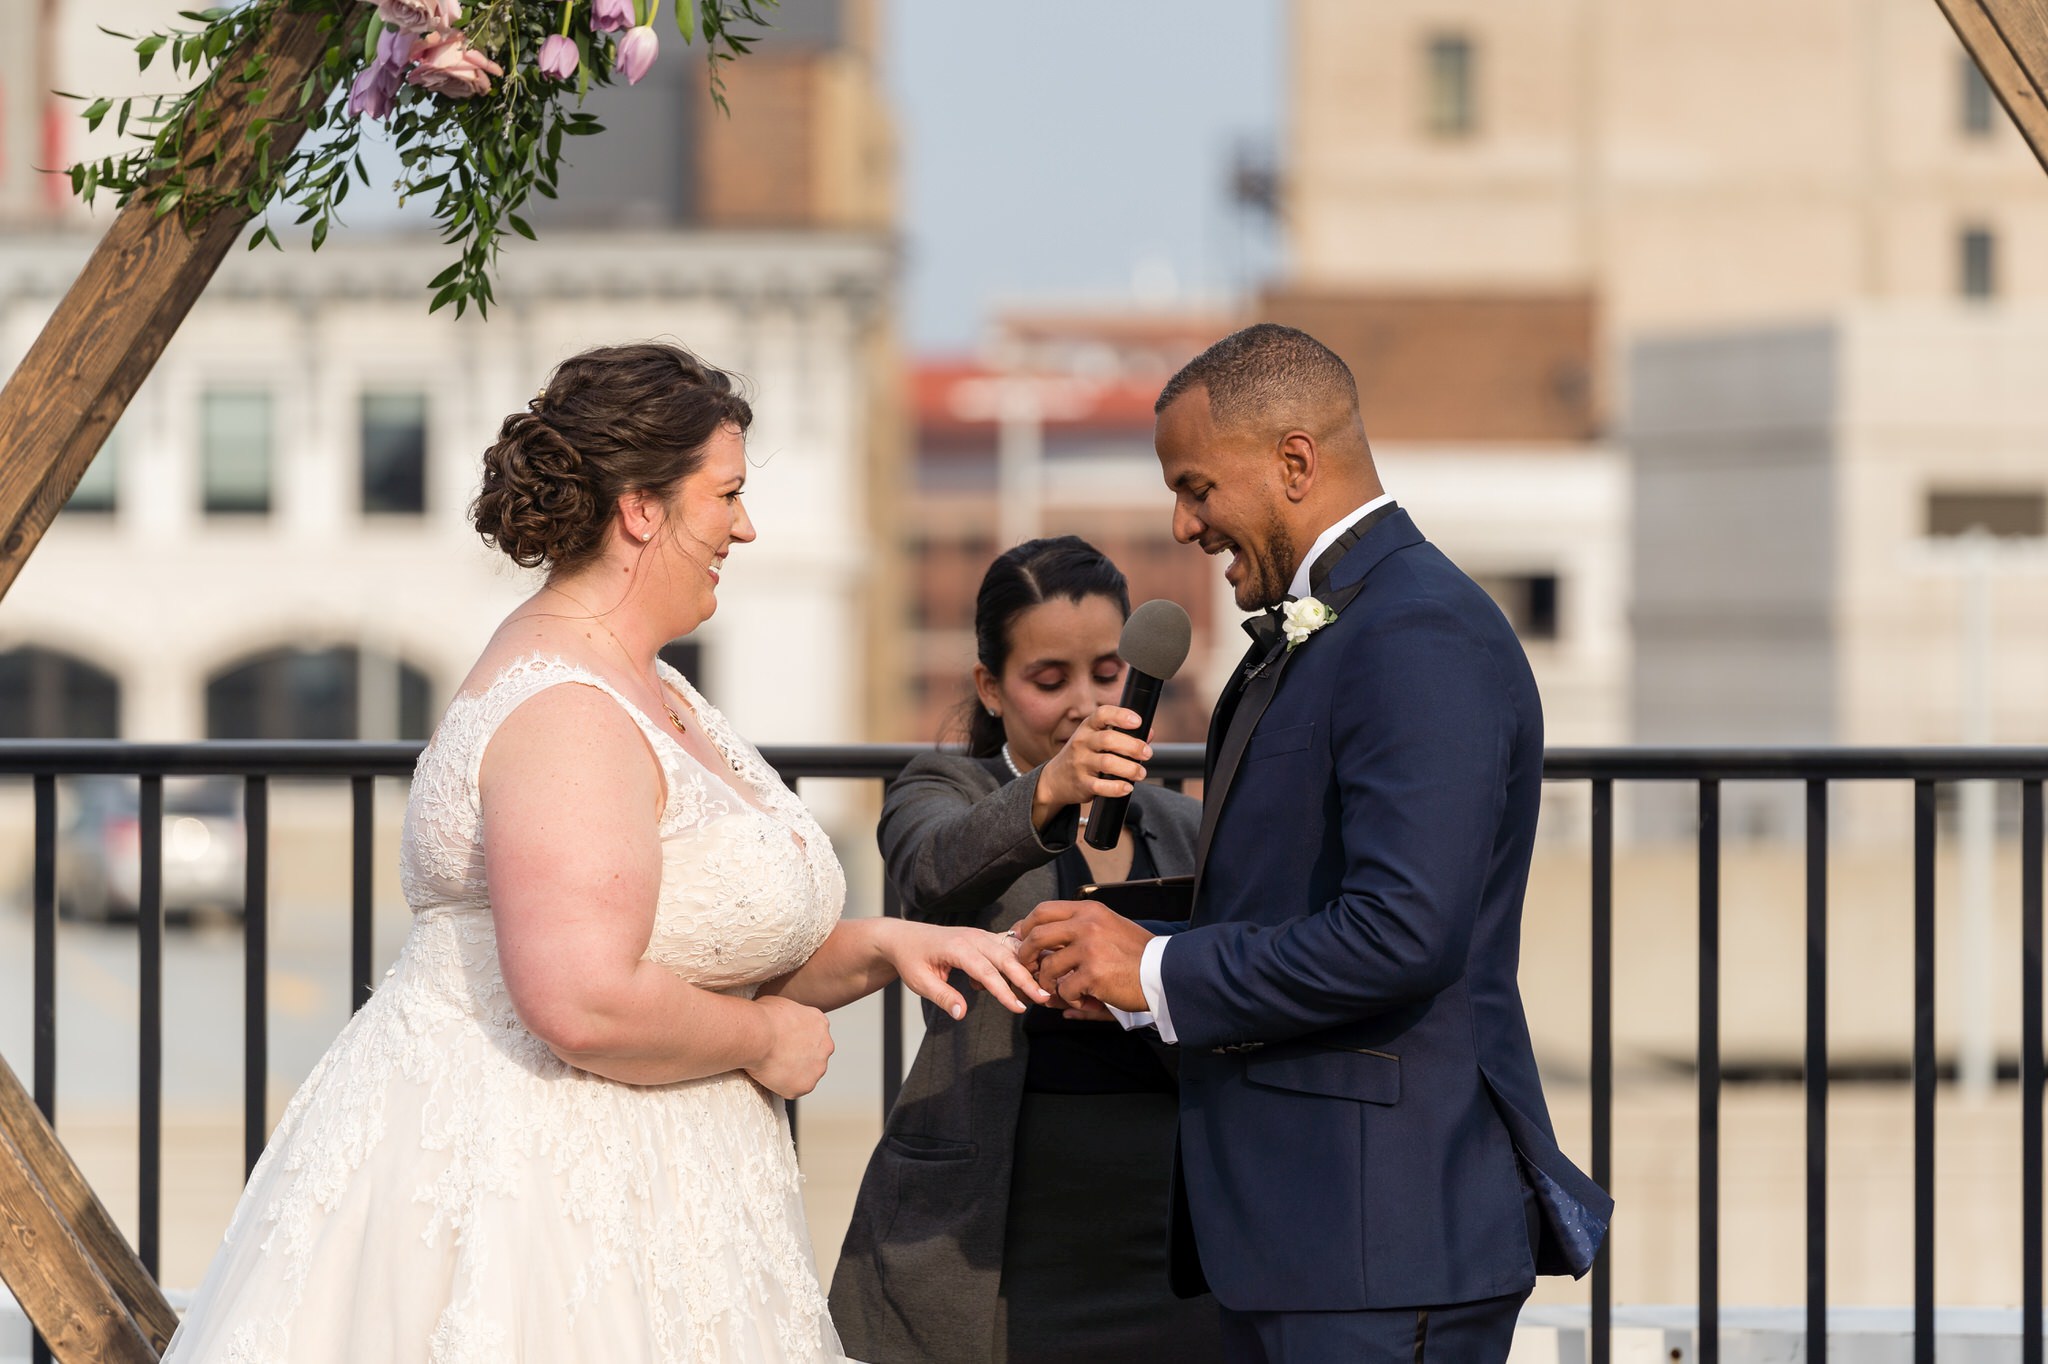 bride and groom exchange rings at their wedding at the Detroit Opera house